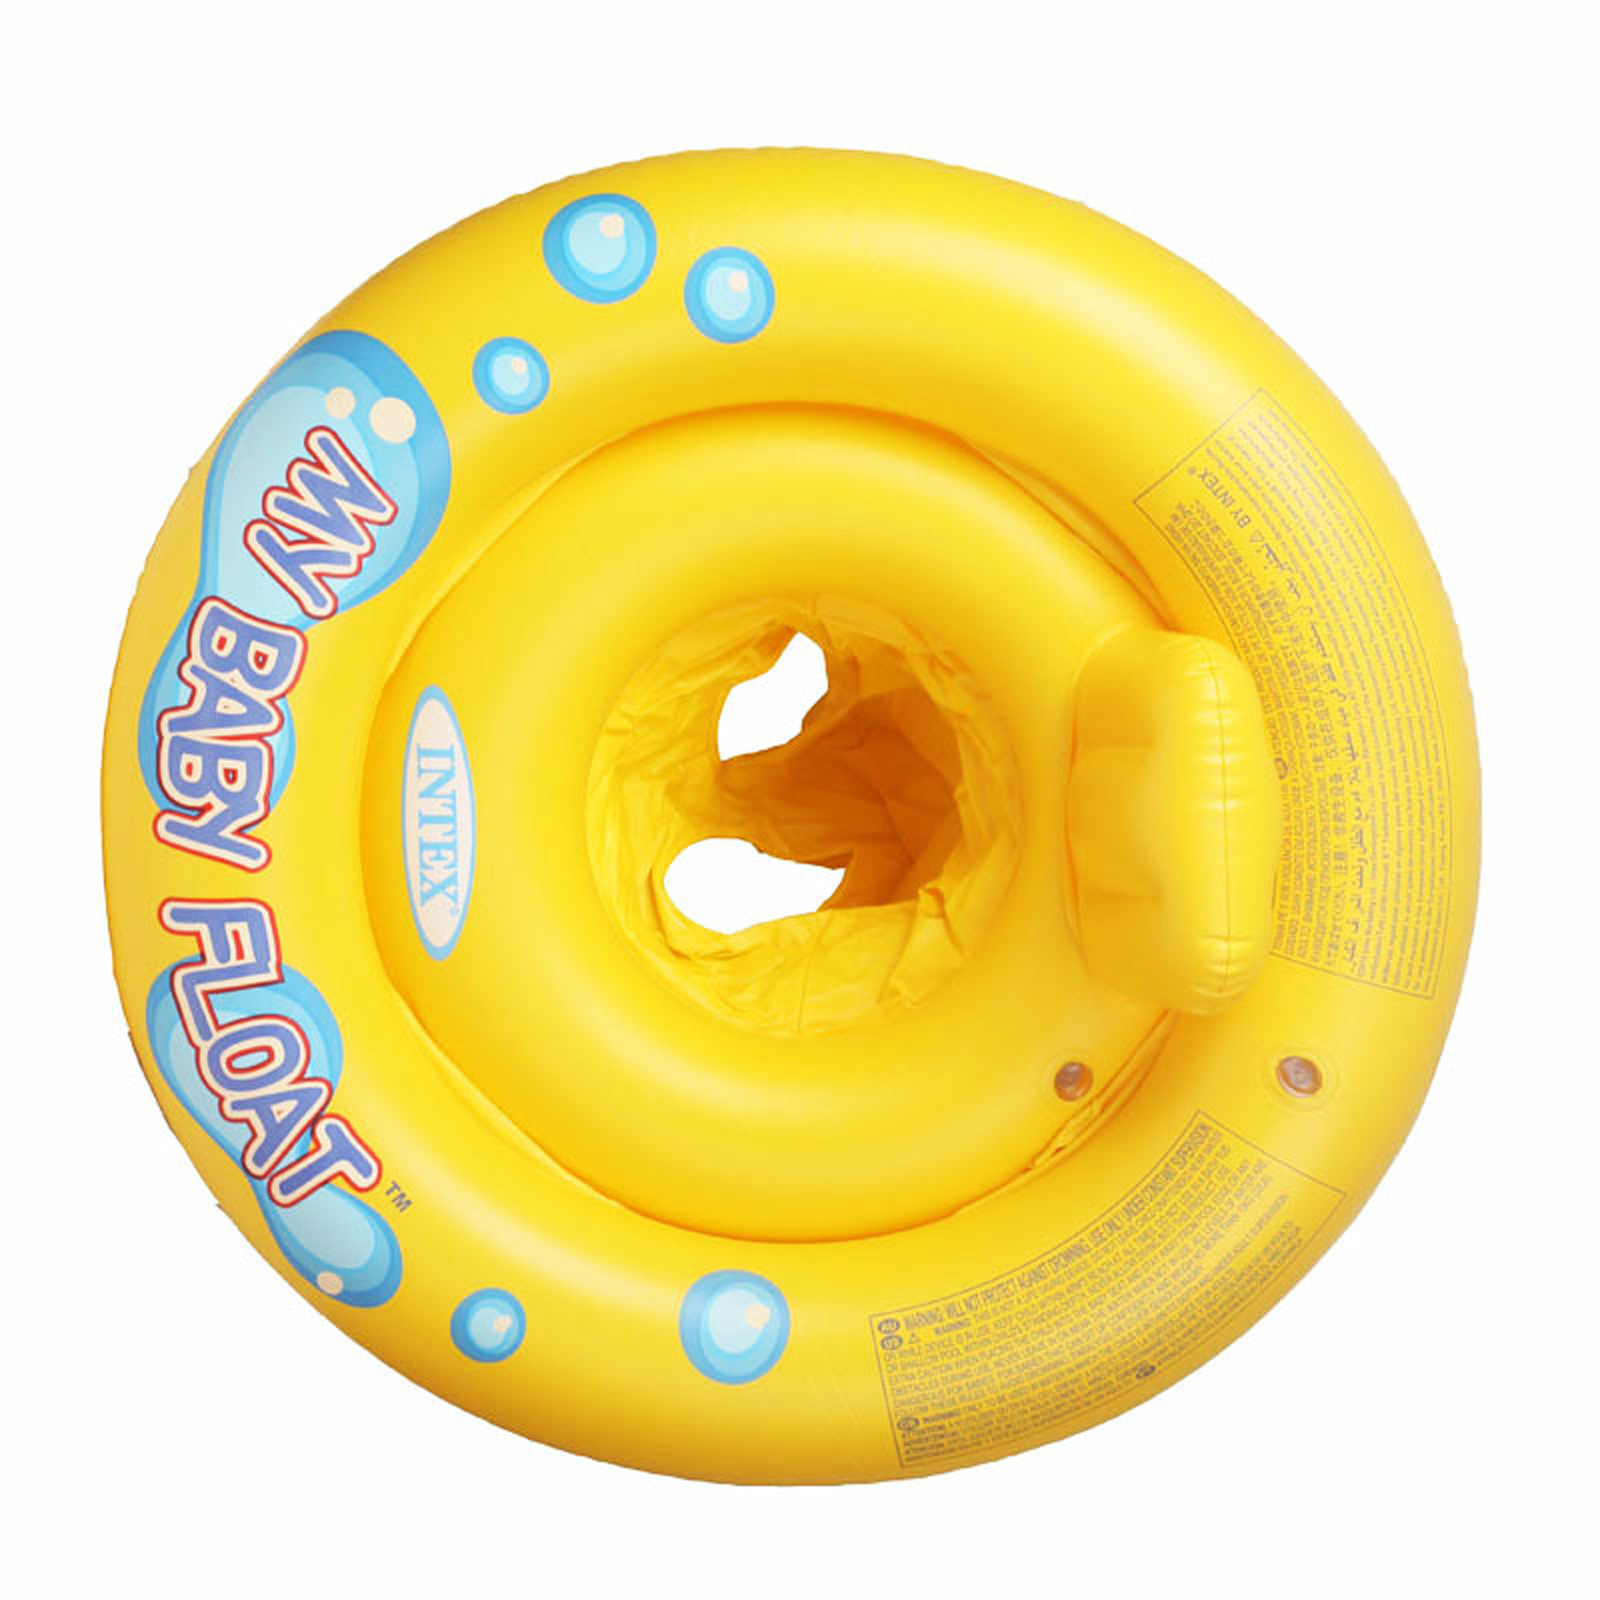 Details about  / Baby Kids Swim Ring Inflatable Toddler Float Seat Swimming Ring Safety Water